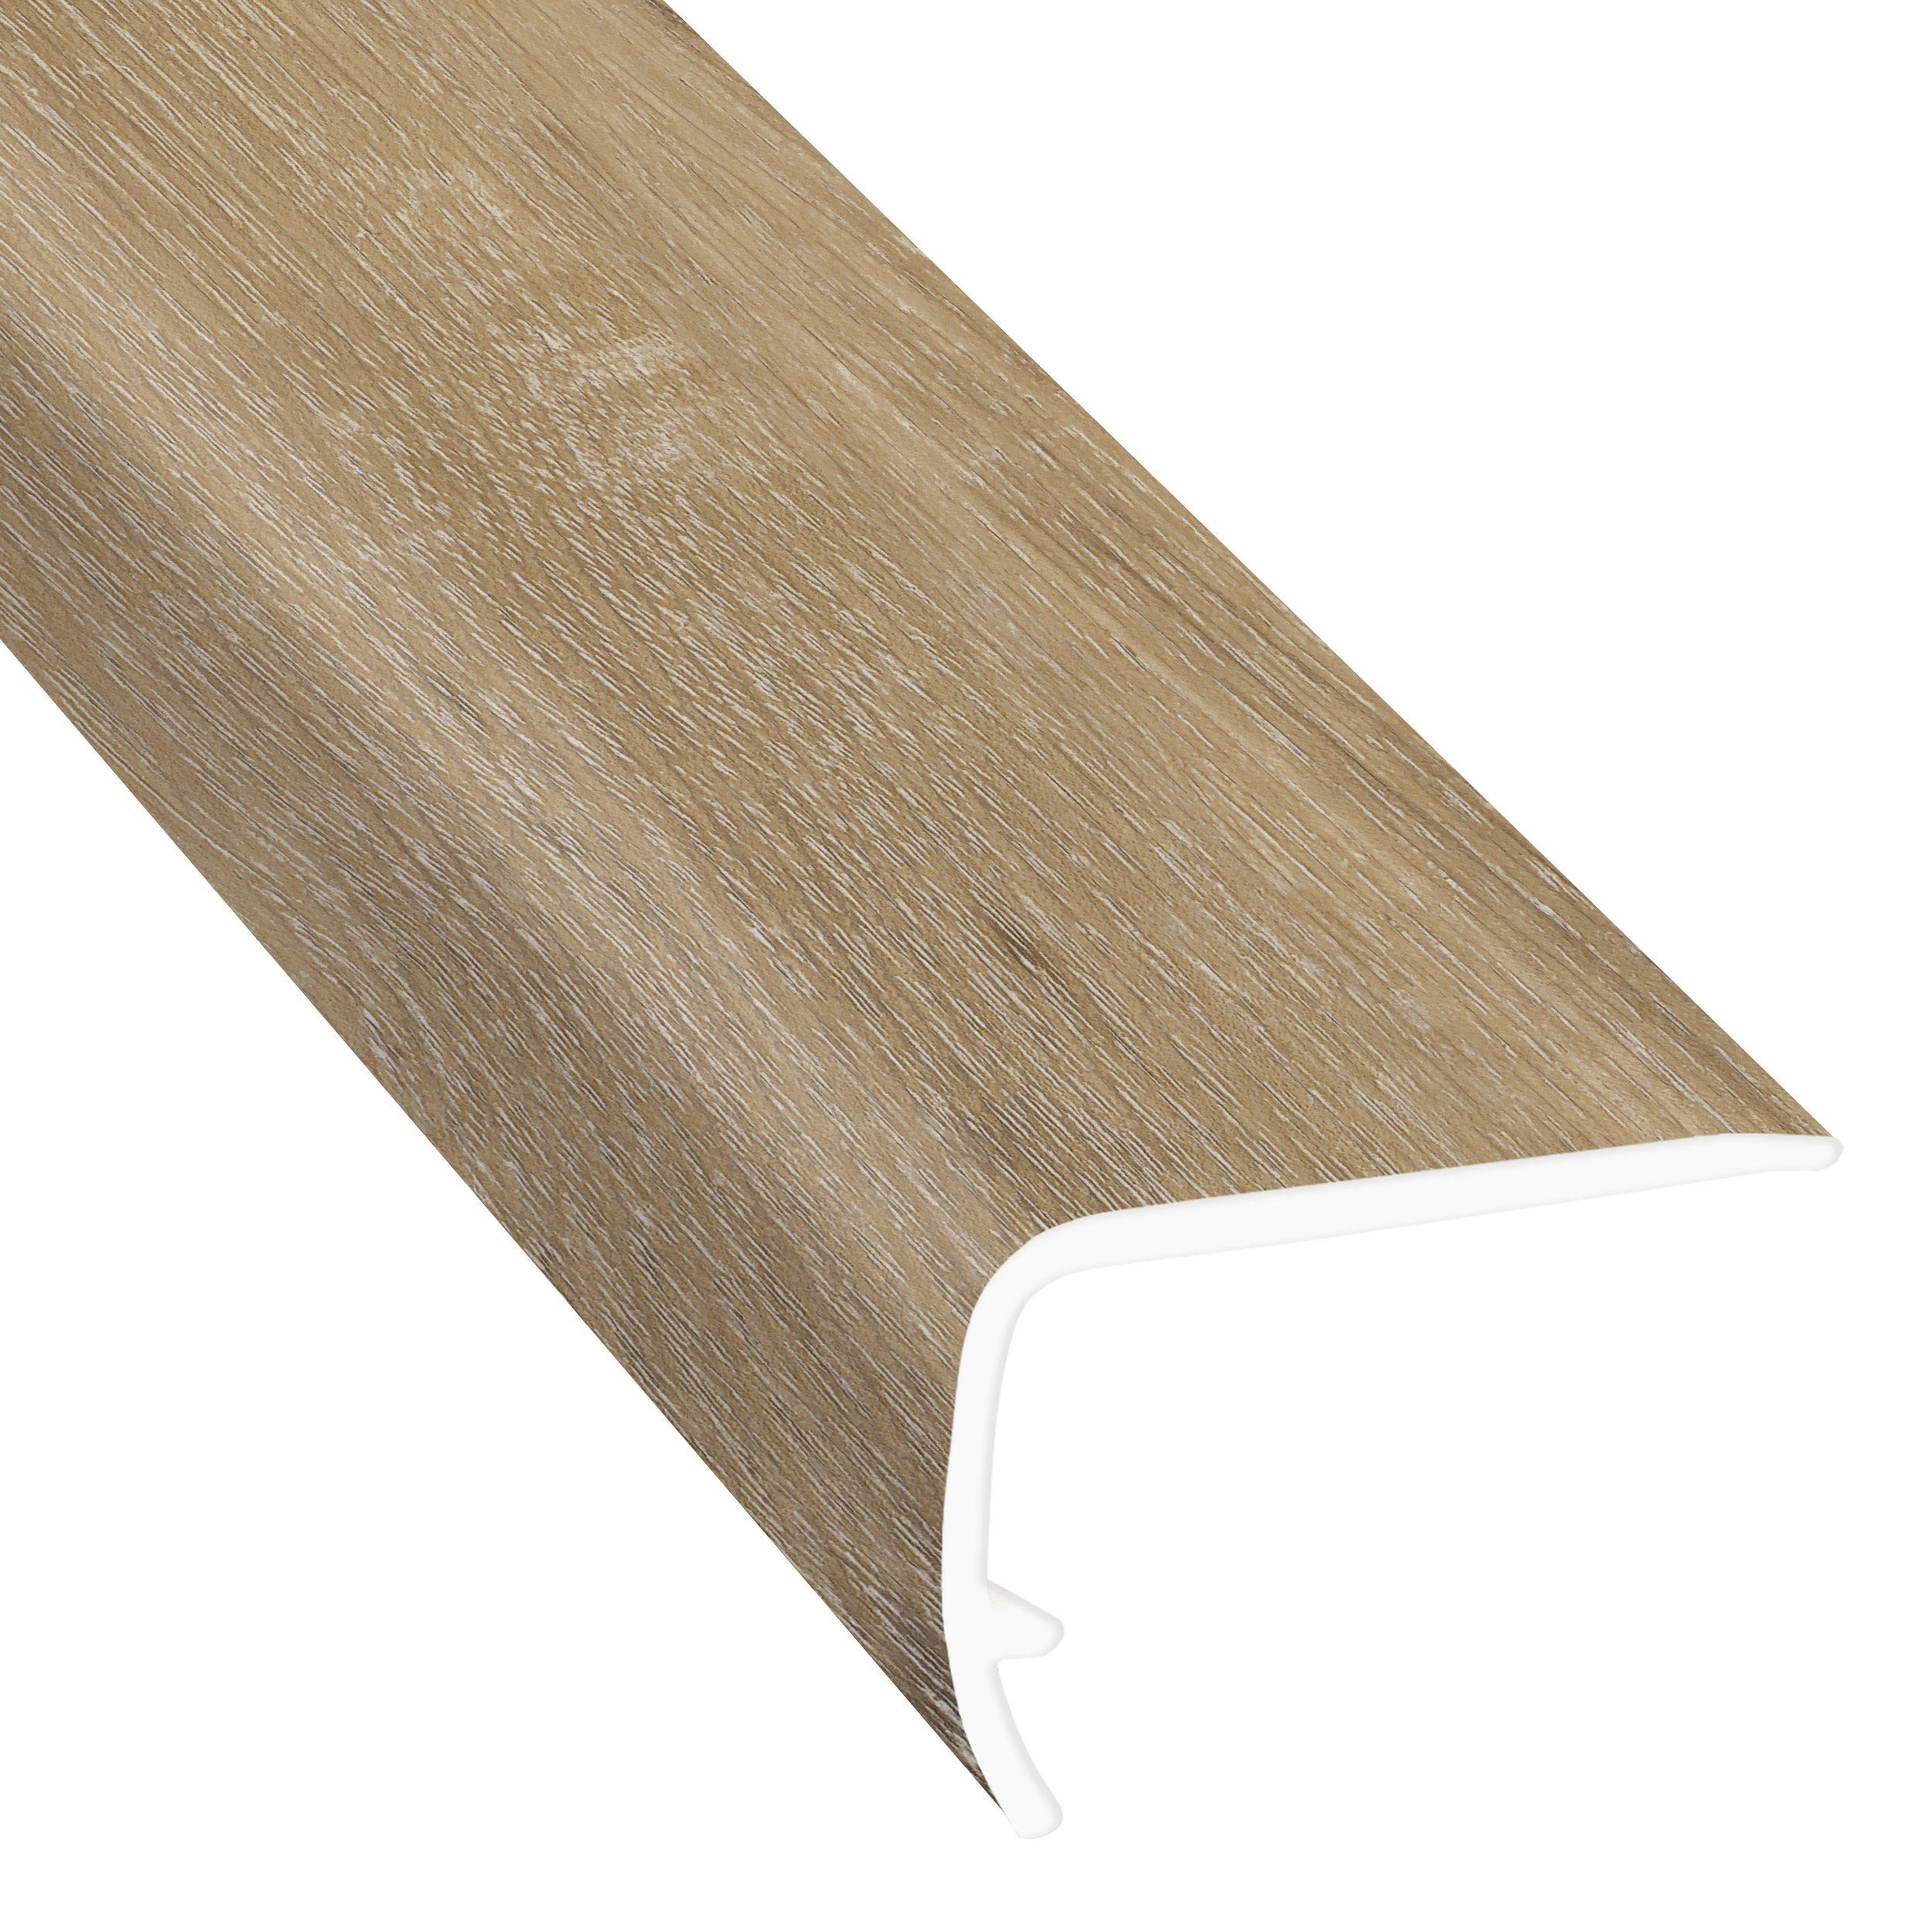 Deerfield Hickory 94in. Vinyl Overlapping Stair Nose